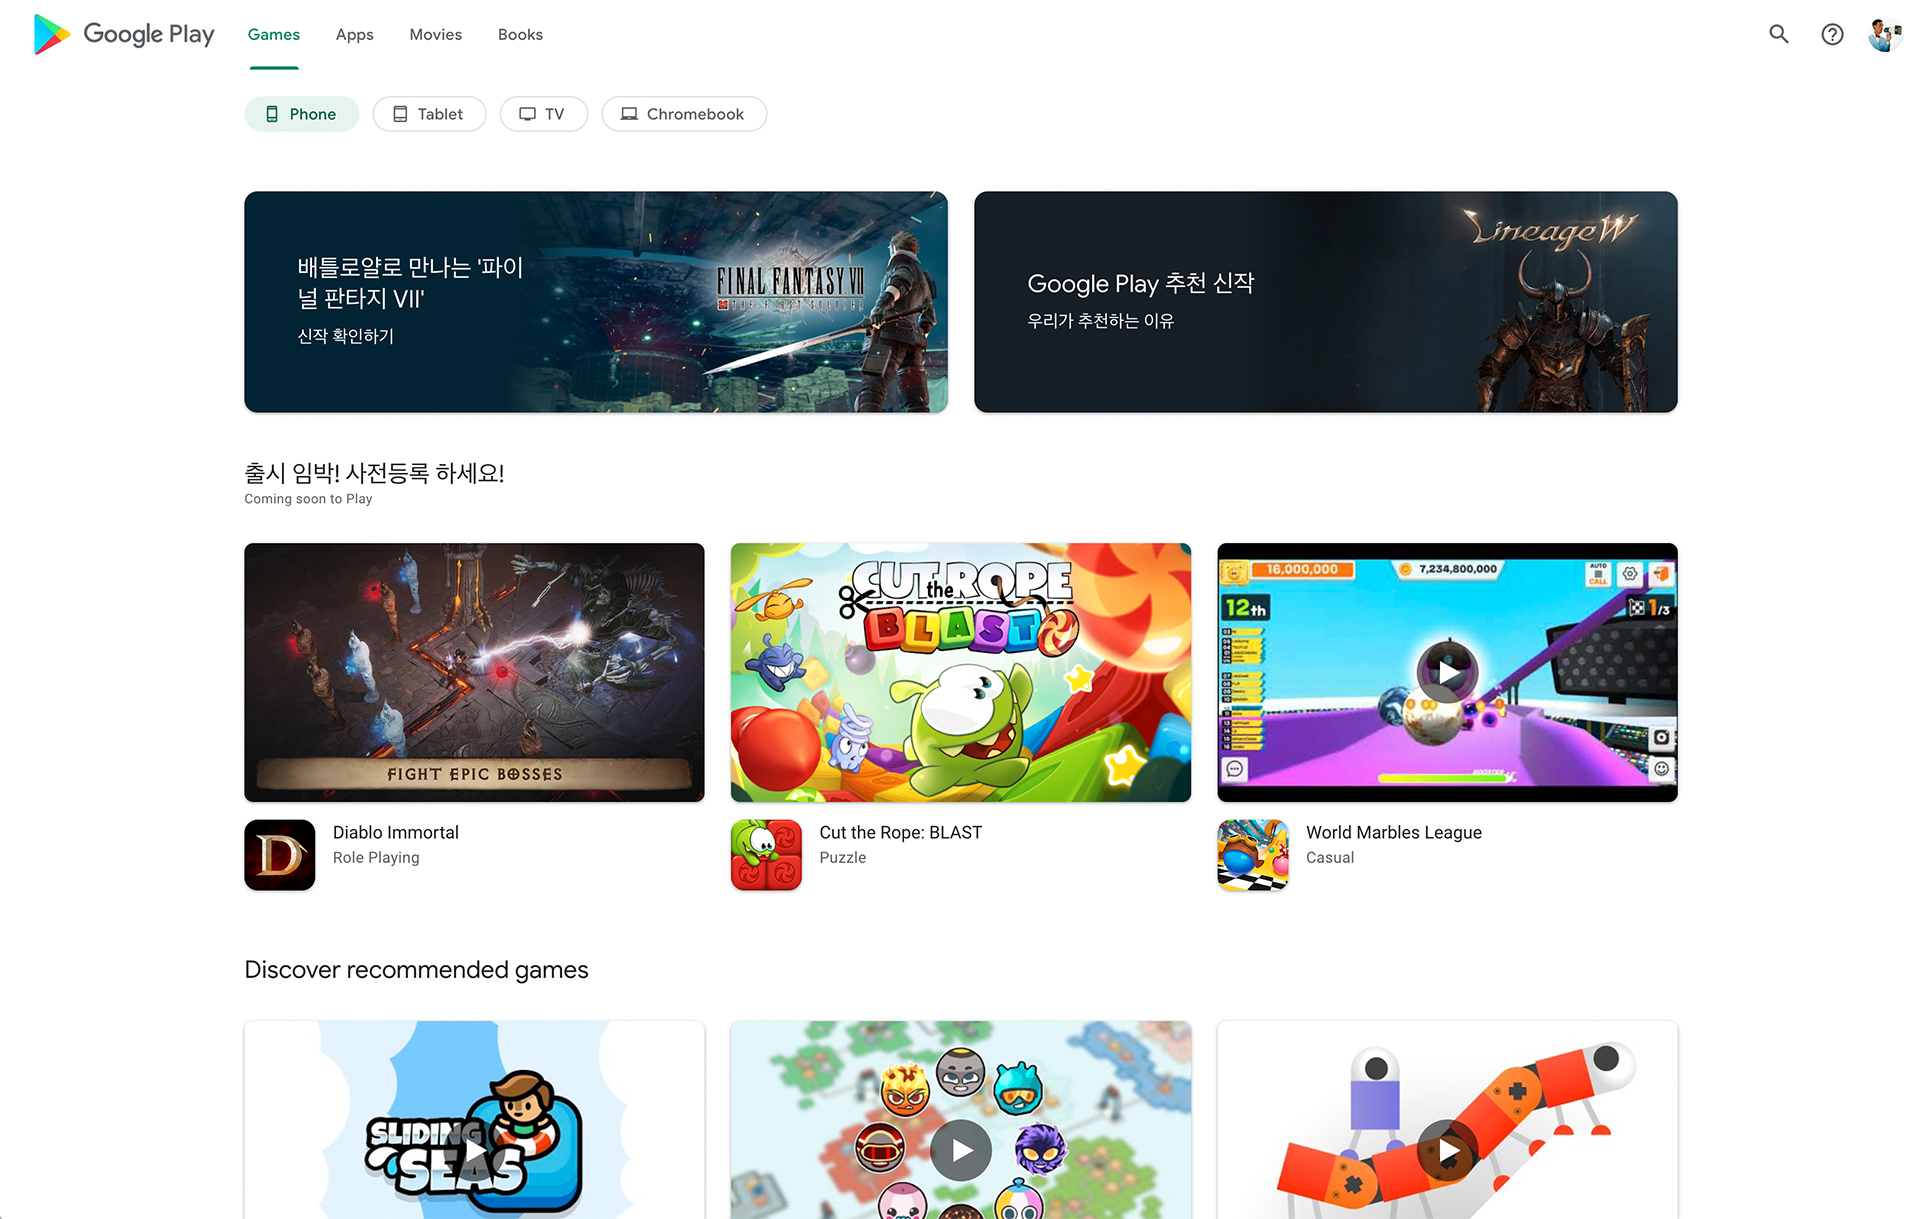 The Google Play Retailer web scream might maybe presumably additionally earn a prolonged-awaited redesign